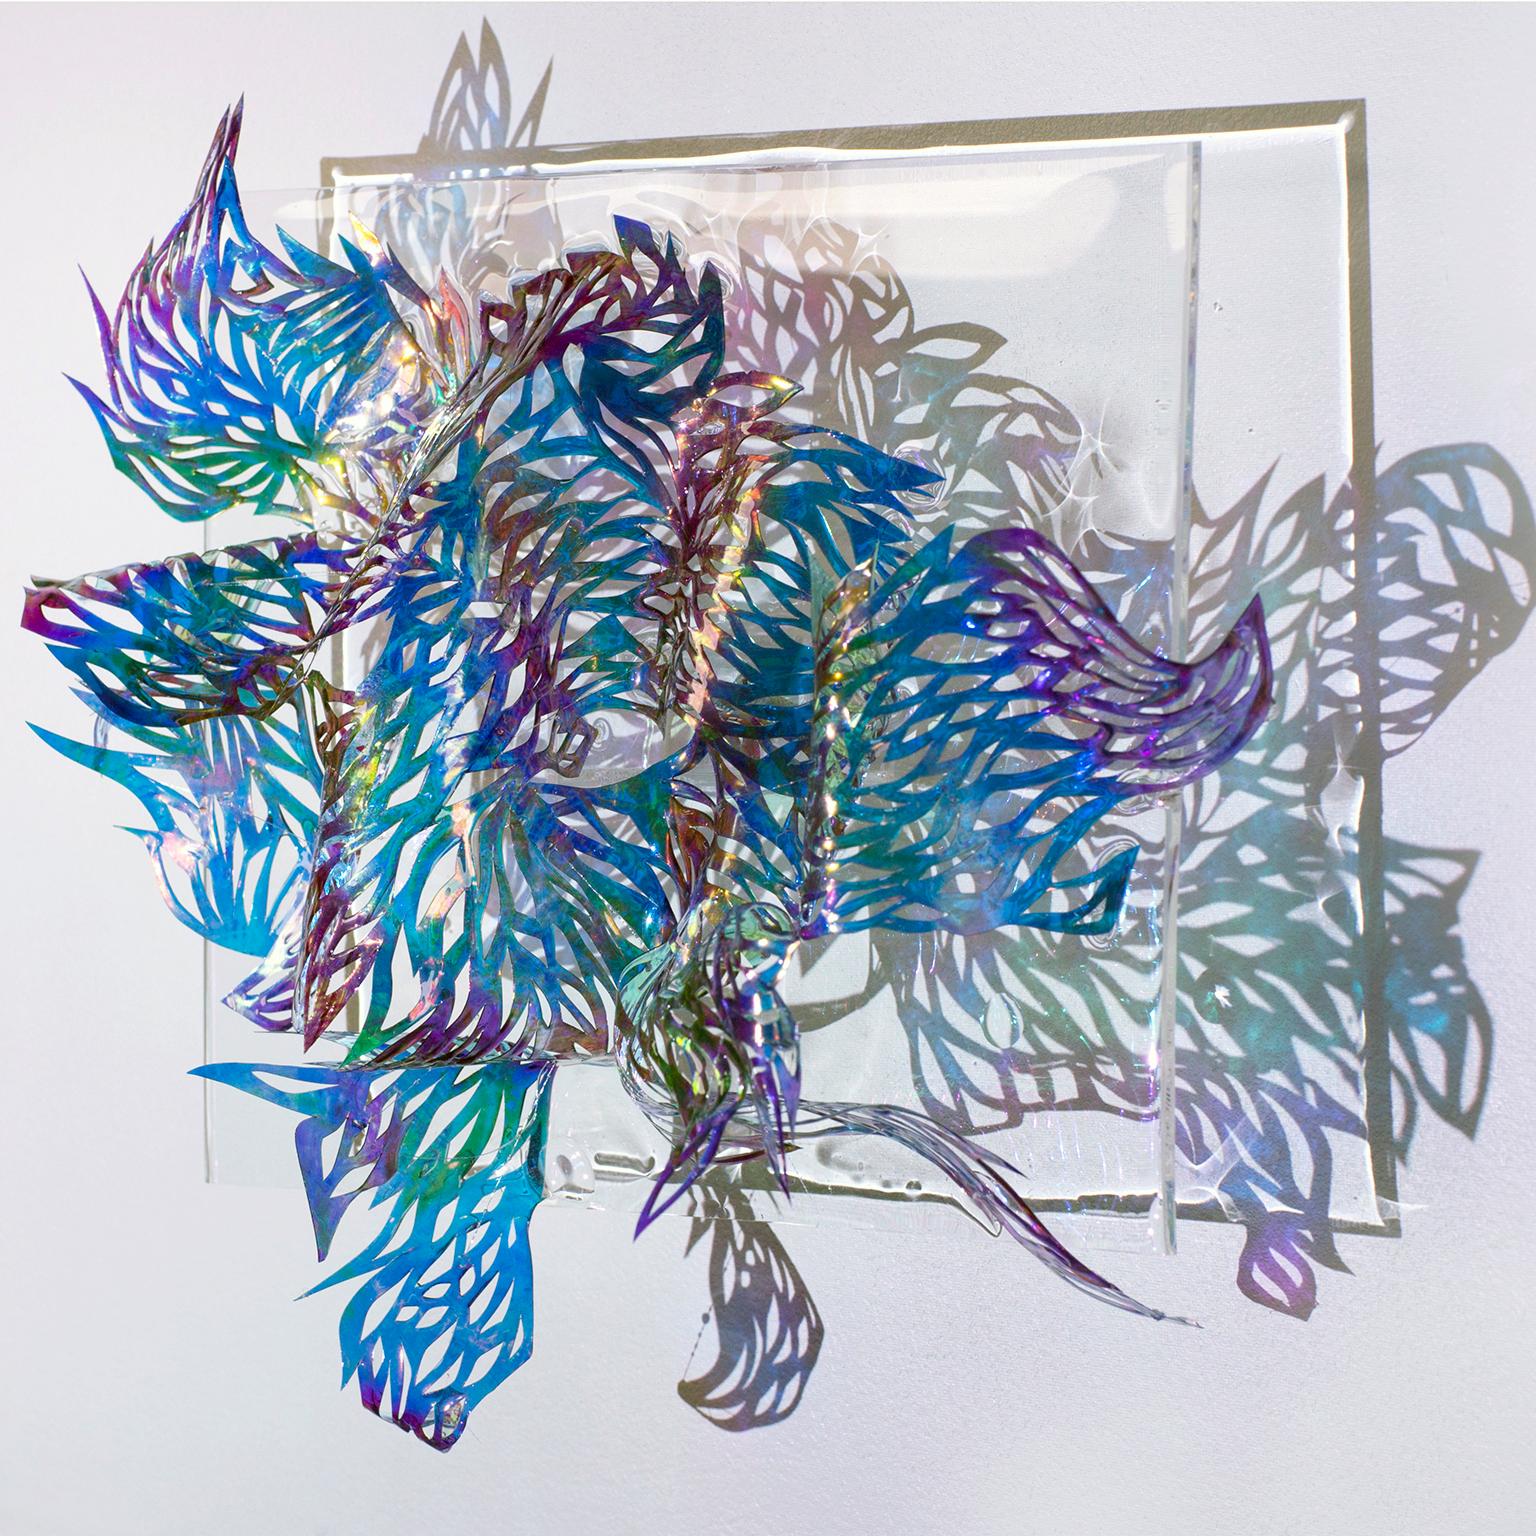 Medium: hand cut vinyl, acrylic, resin

Julia Sinelnikova is an interdisciplinary artist who works with holograms, performance, and digital culture. Her light installations have been exhibited internationally, and she has performed widely as The